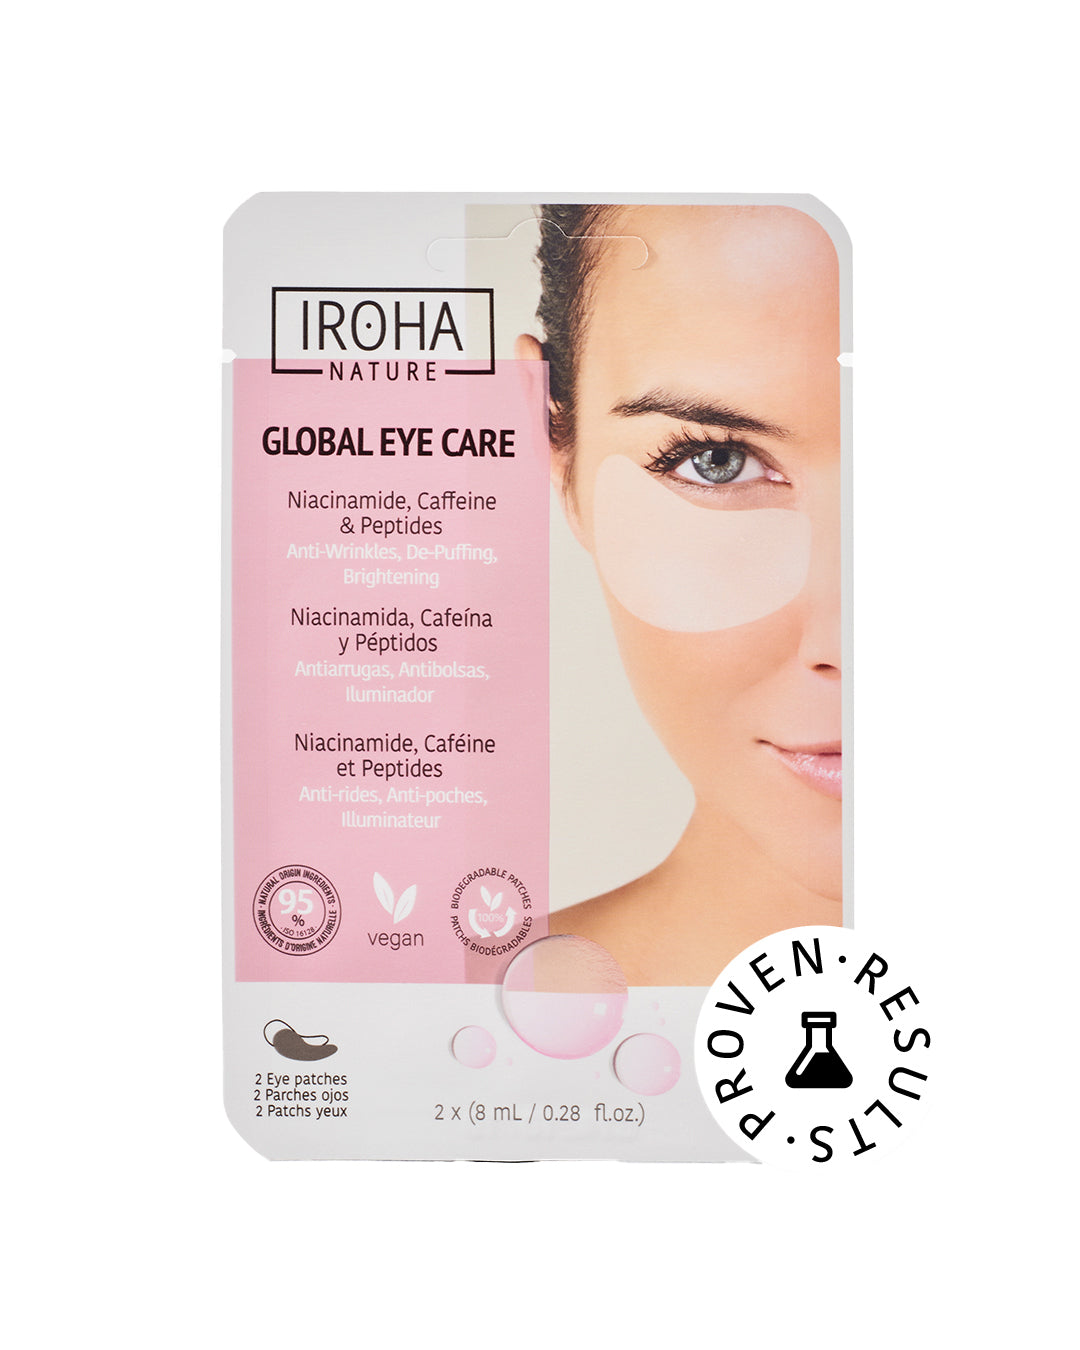 

"Iroha Nature Eye Patches with Niacinamide Caffeine and Peptides, Anti-Wrinkle, Dark Circles and Brightening 2 pcs x 8ml" 